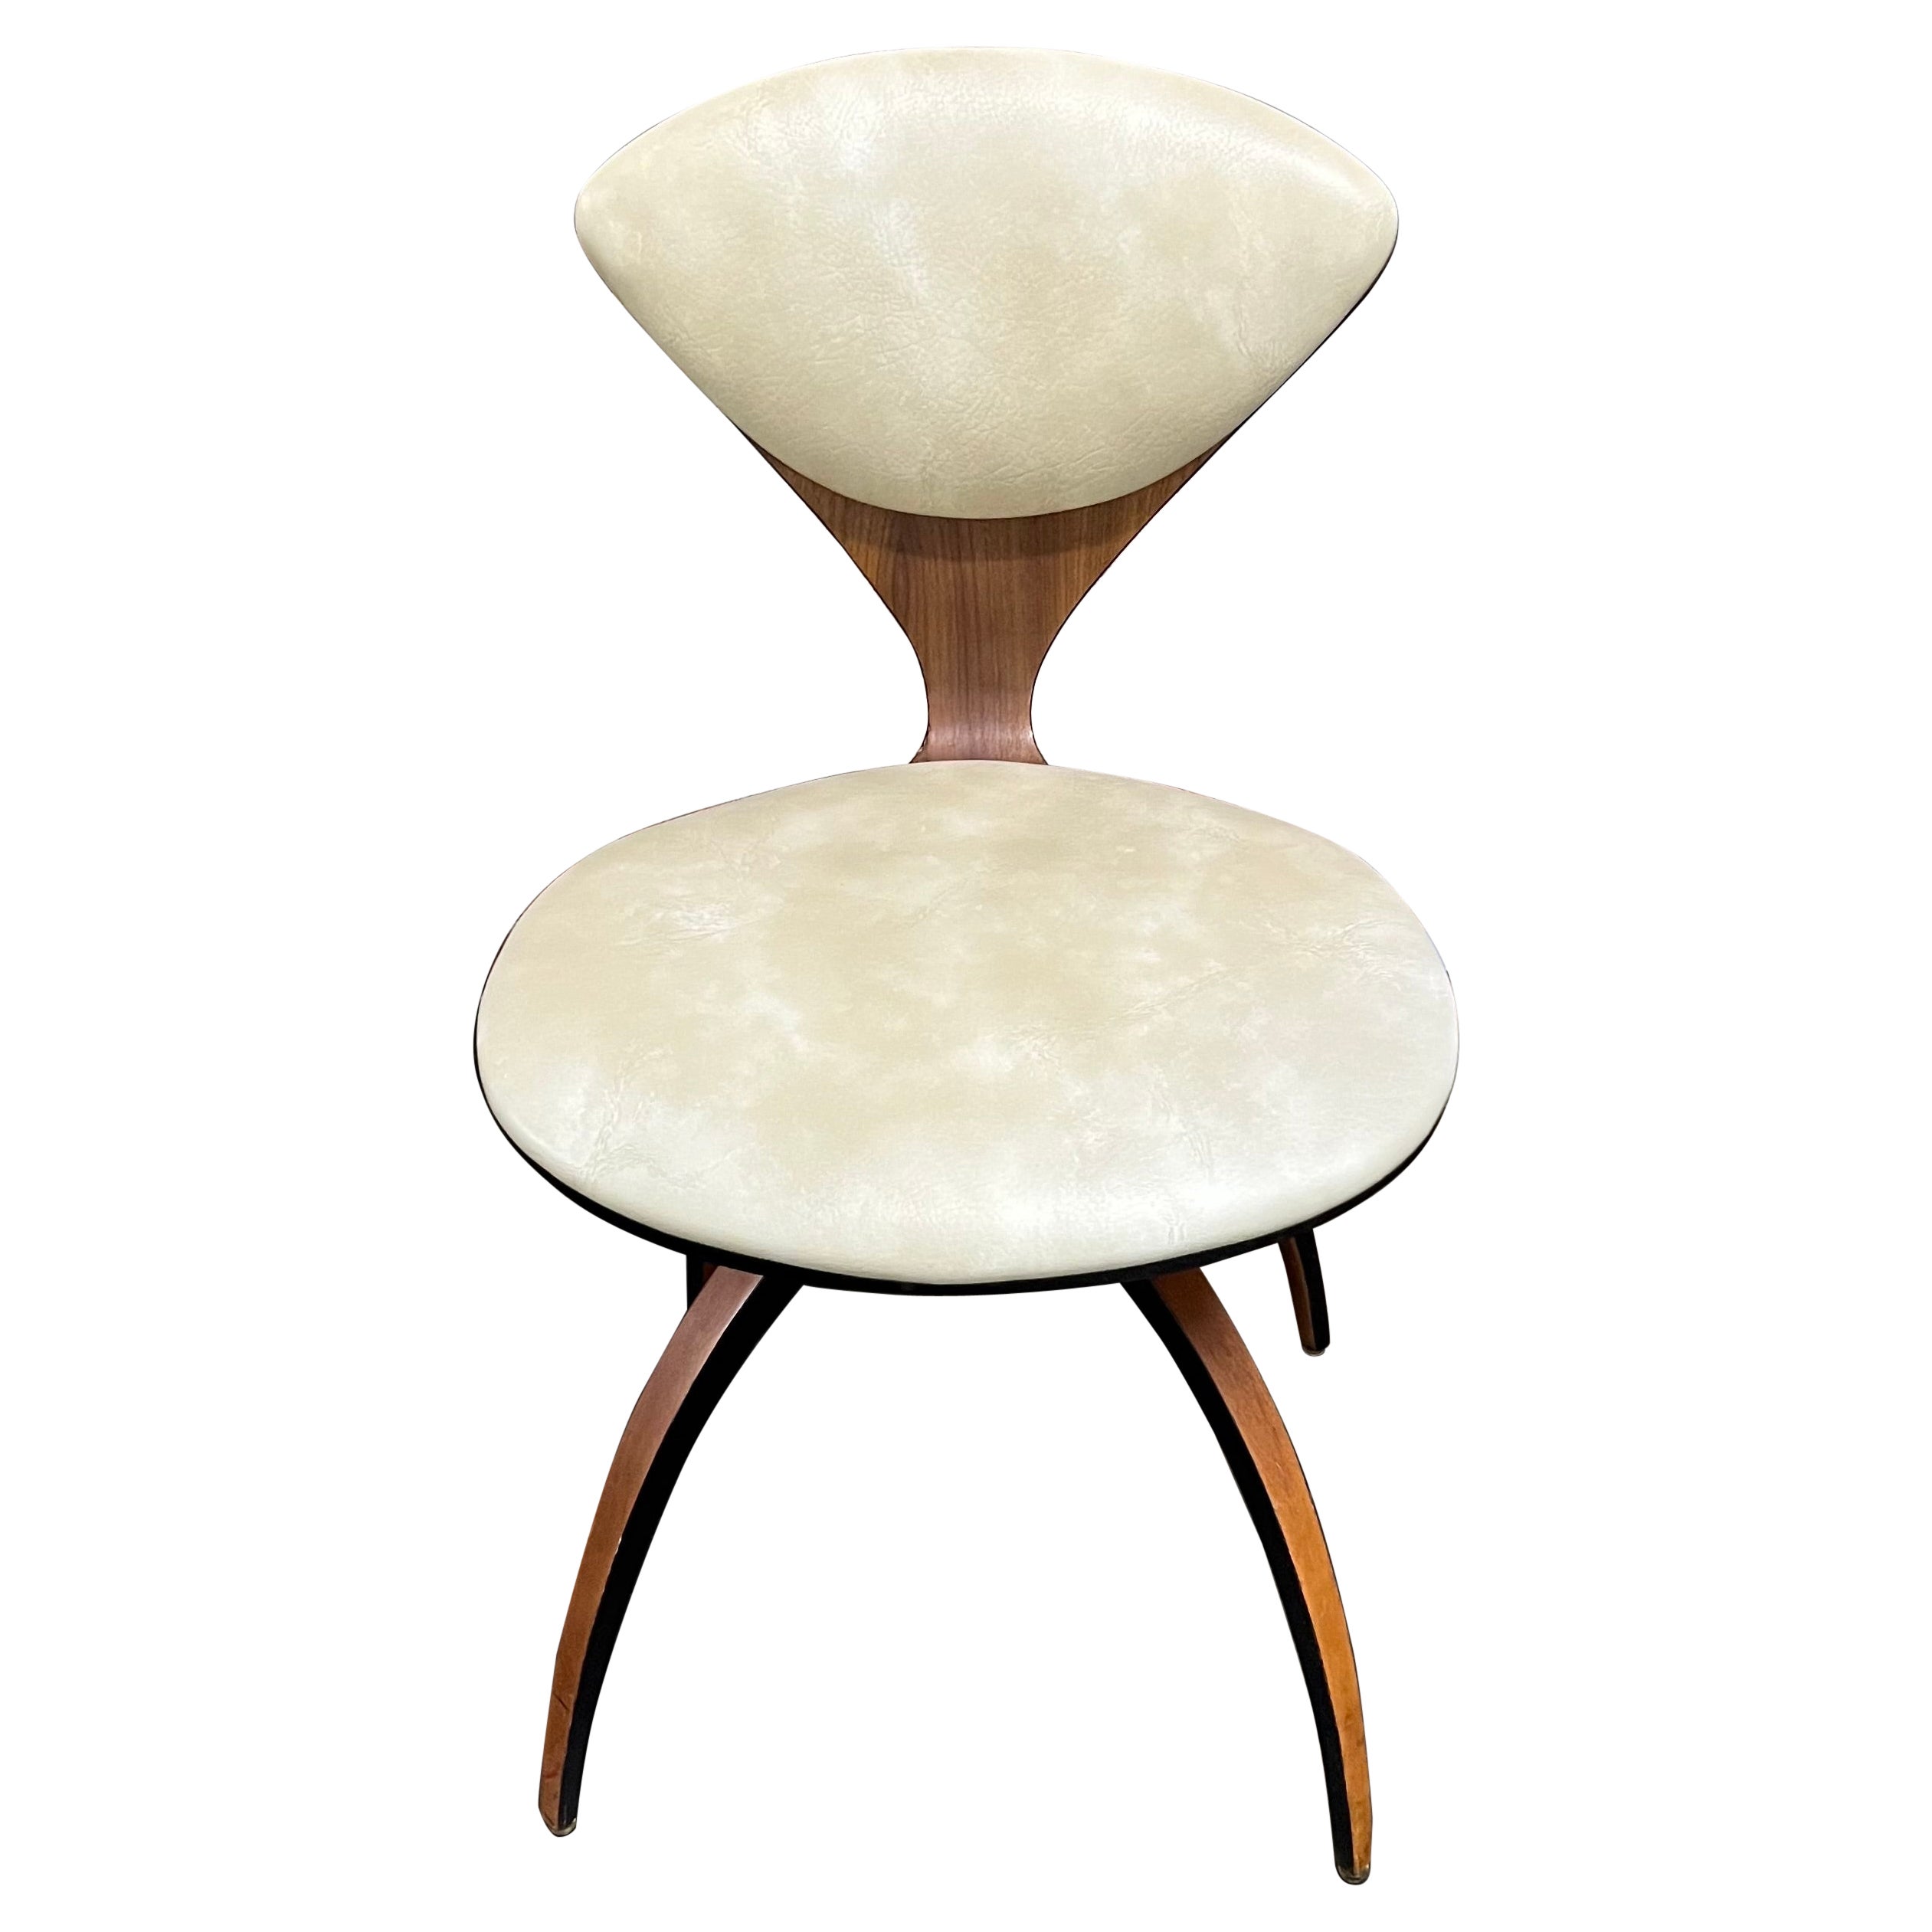 Norman Cherner for Plycraft Bentwood Swivel Chair with Cream Upholstery